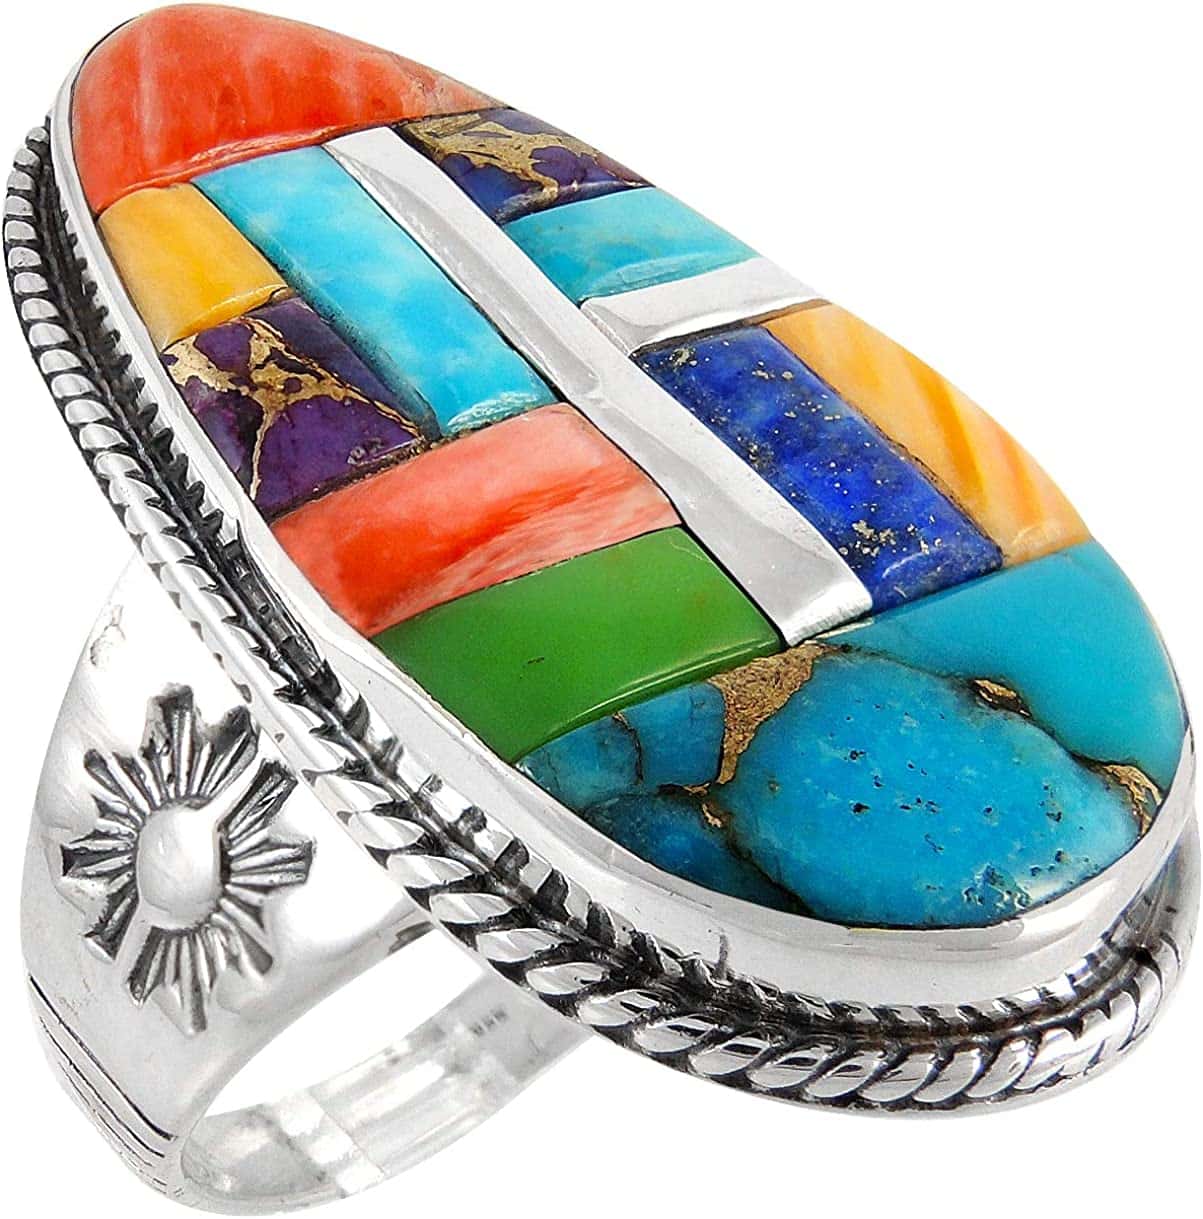 Gemstones and turquoise ring